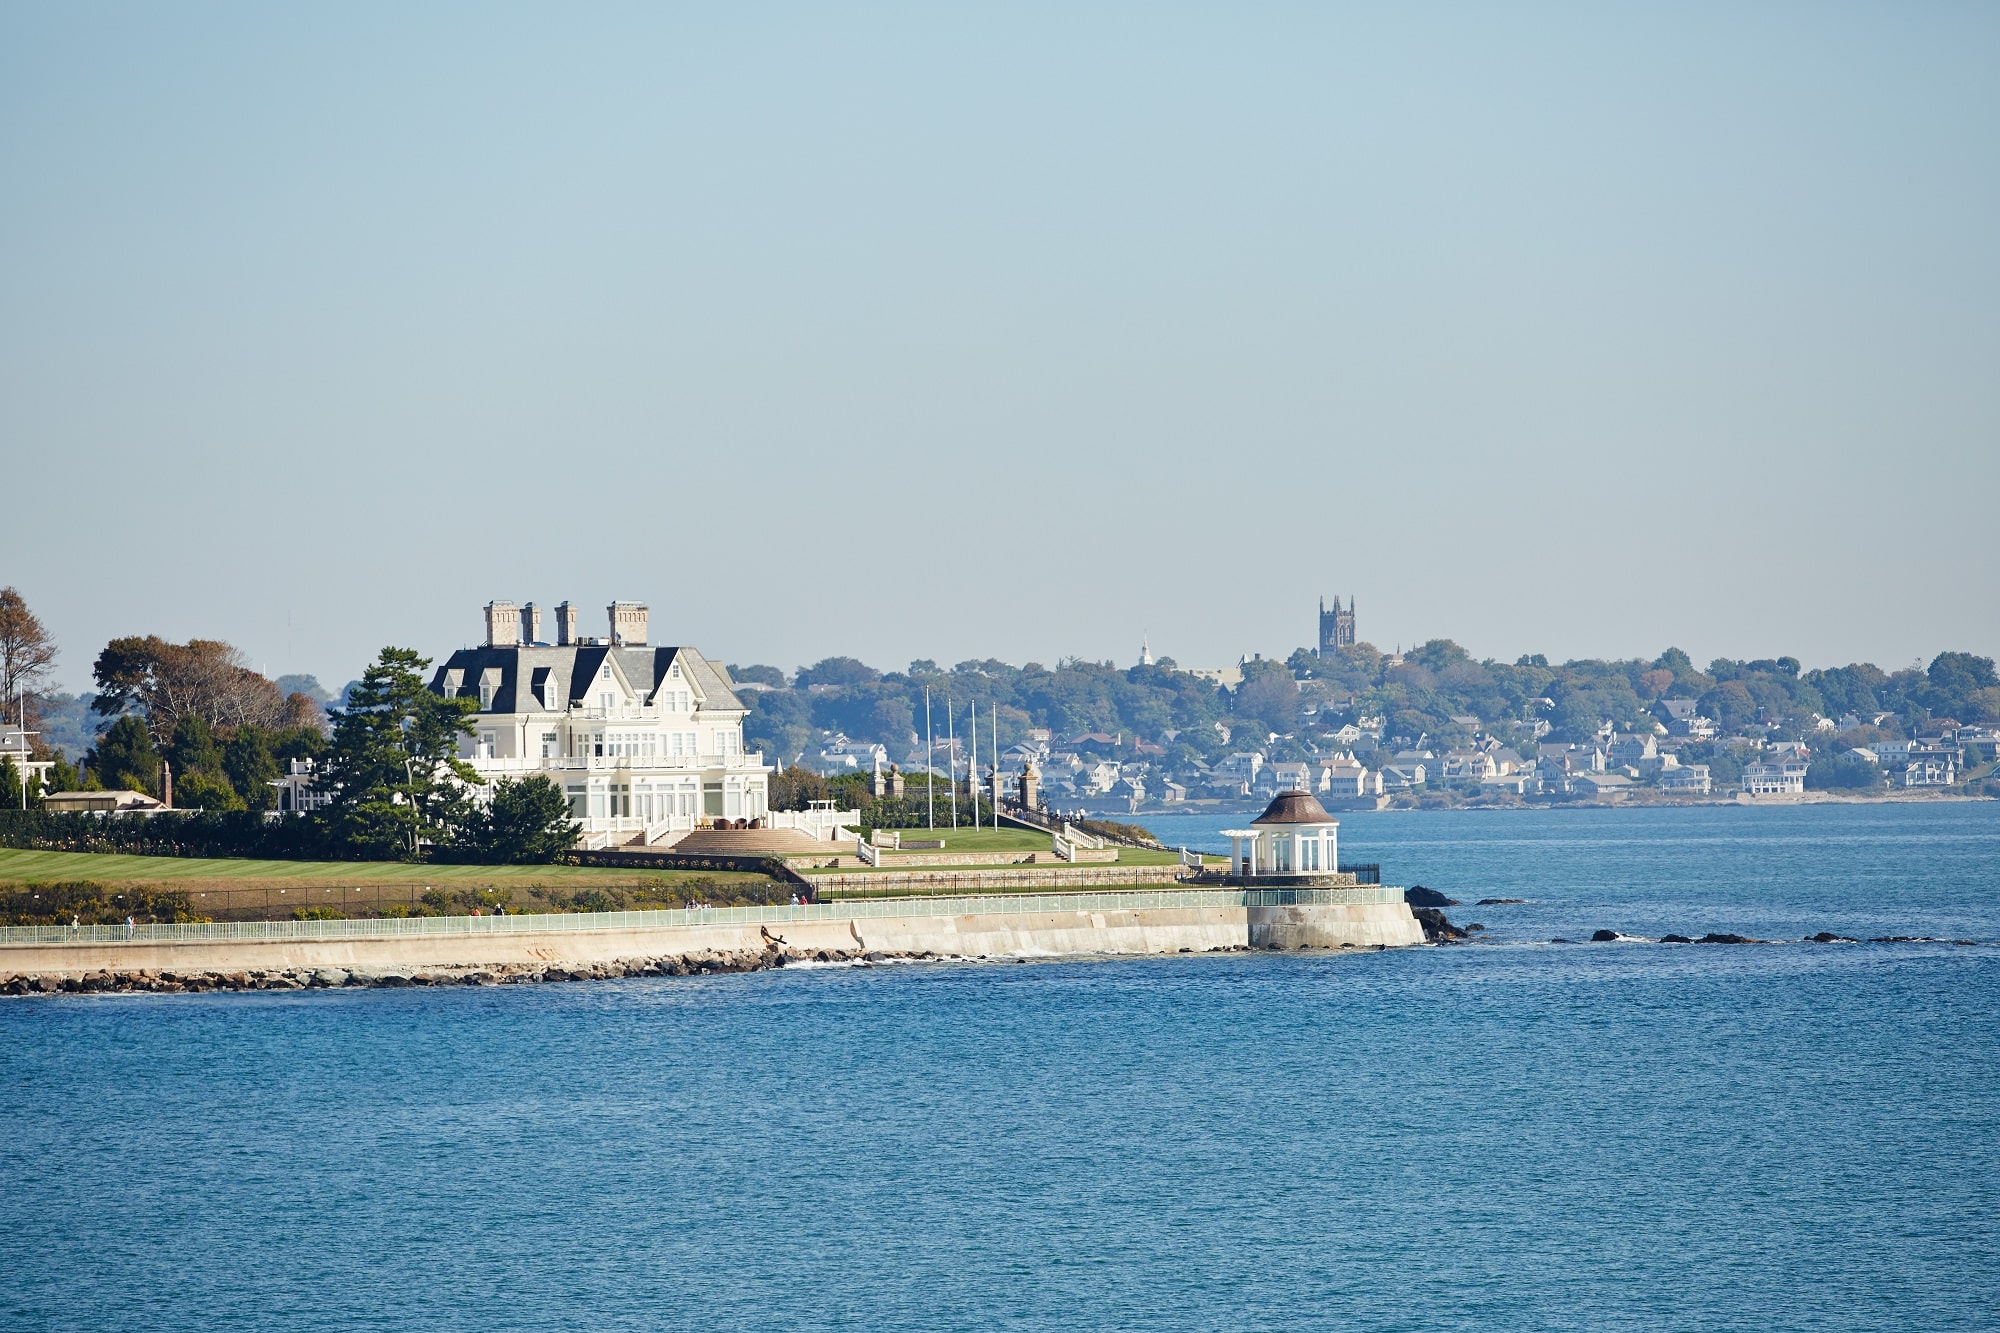 summer cruise to new england and canada